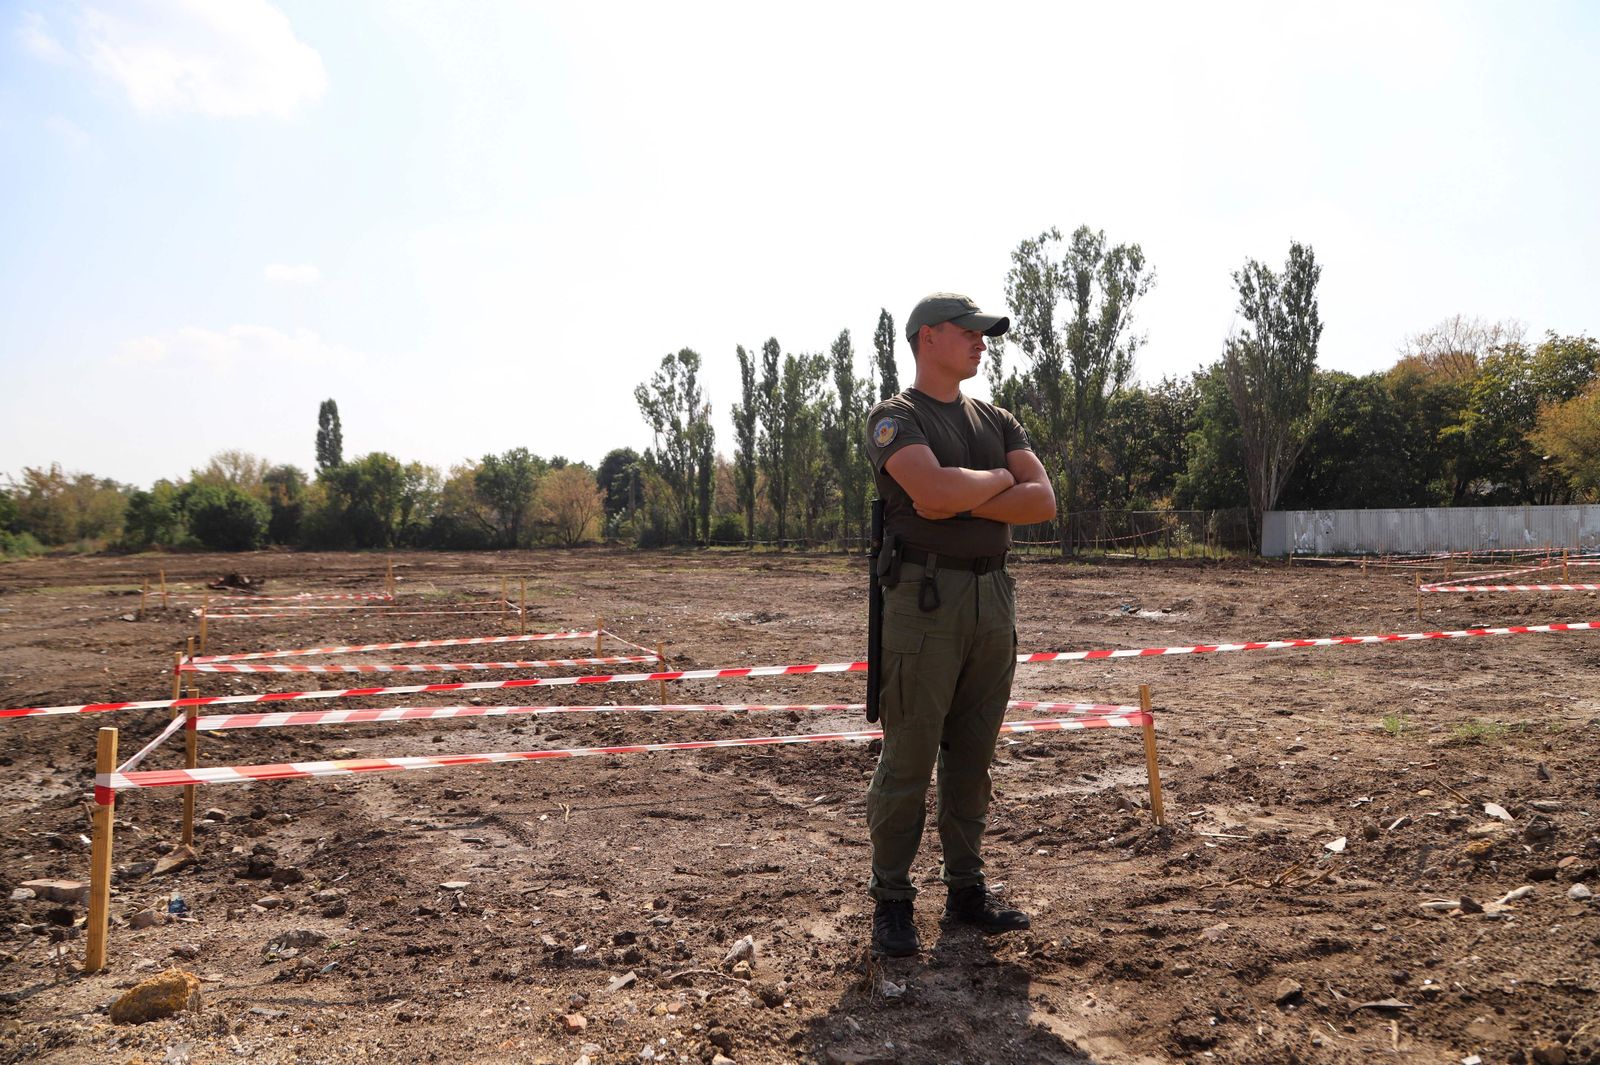 A security person stands guard at the mass graves site discovered on an abandoned area near the city airport where until recently was a dump in Odessa on August 30, 2021. - The remains of thousands of people believed to be victims of Stalin's Terror have been discovered in Ukraine's southern city of Odessa, local authorities said on August 30, 2021. The bones of between 5,000 to 8,000 people were found in over two dozen graves close to Odessa's airport, making it one of the largest mass graves unearthed in Ukraine so far. (Photo by Oleksandr GIMANOV / AFP) - AFP